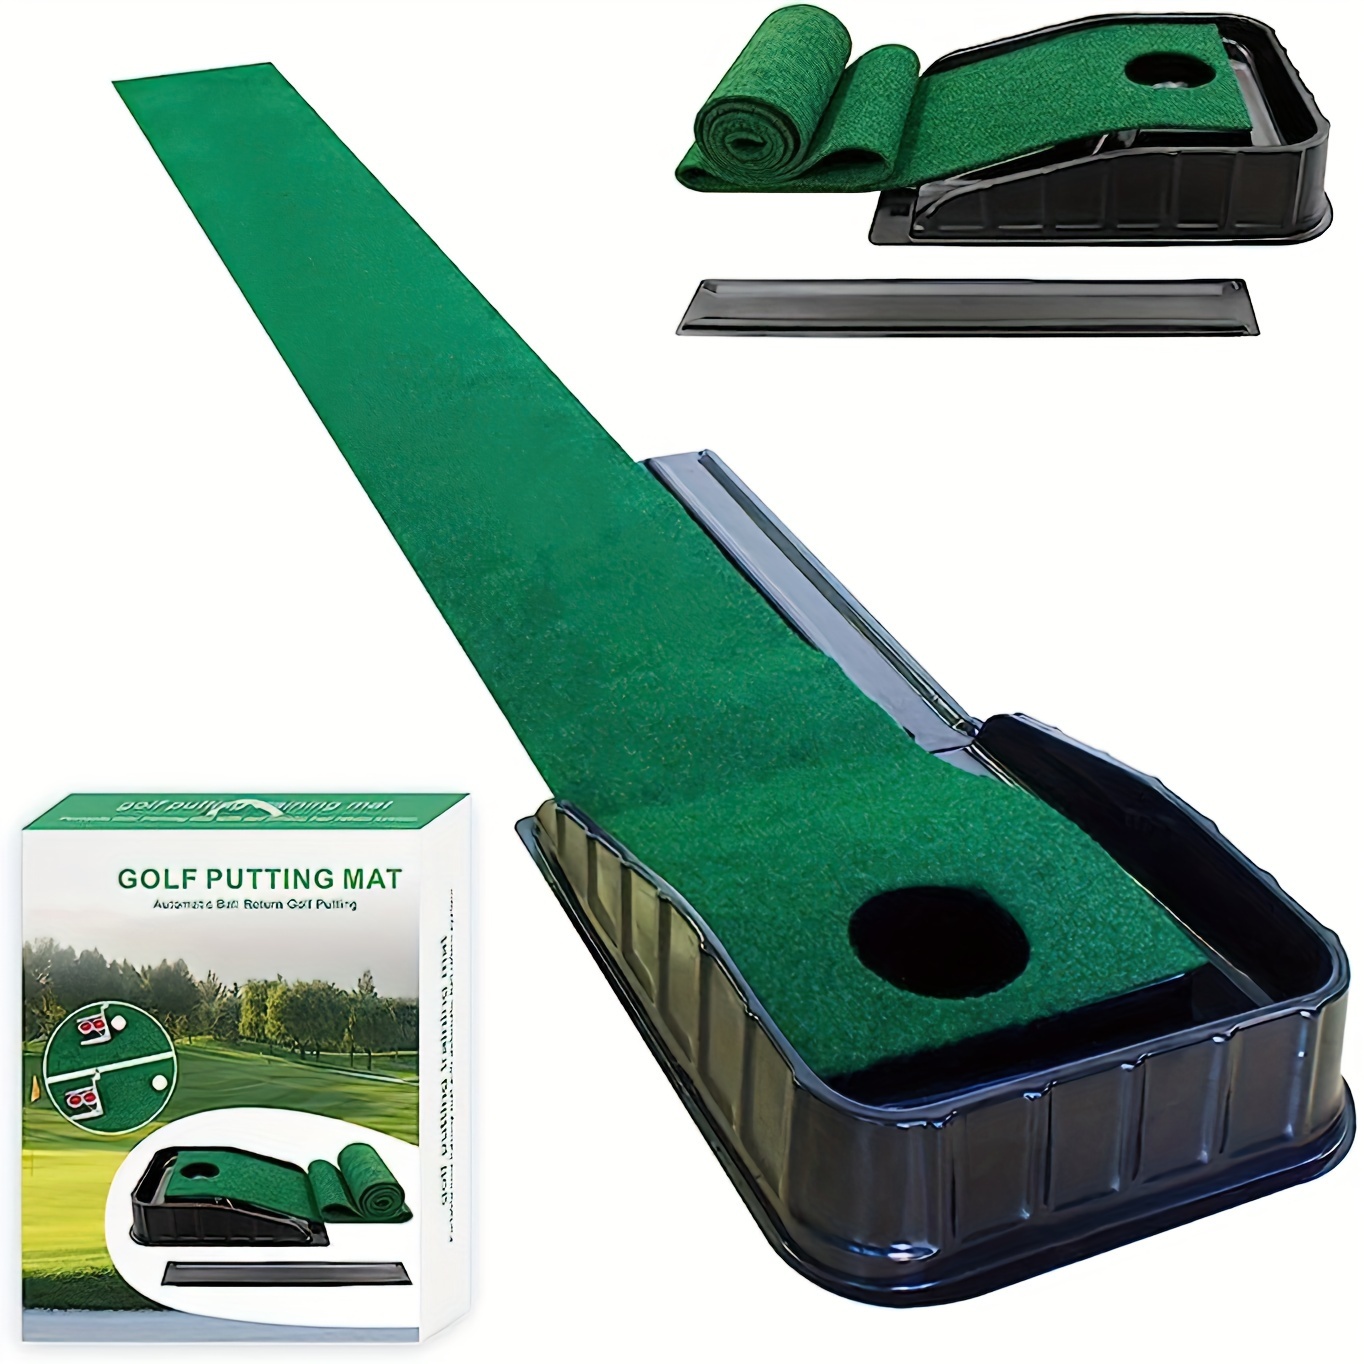 

Indoor Golf Putting Mat For Improve Putting Skills, Auto-ball Return & Behind-the-hole Ball Collector, Golf Accessories